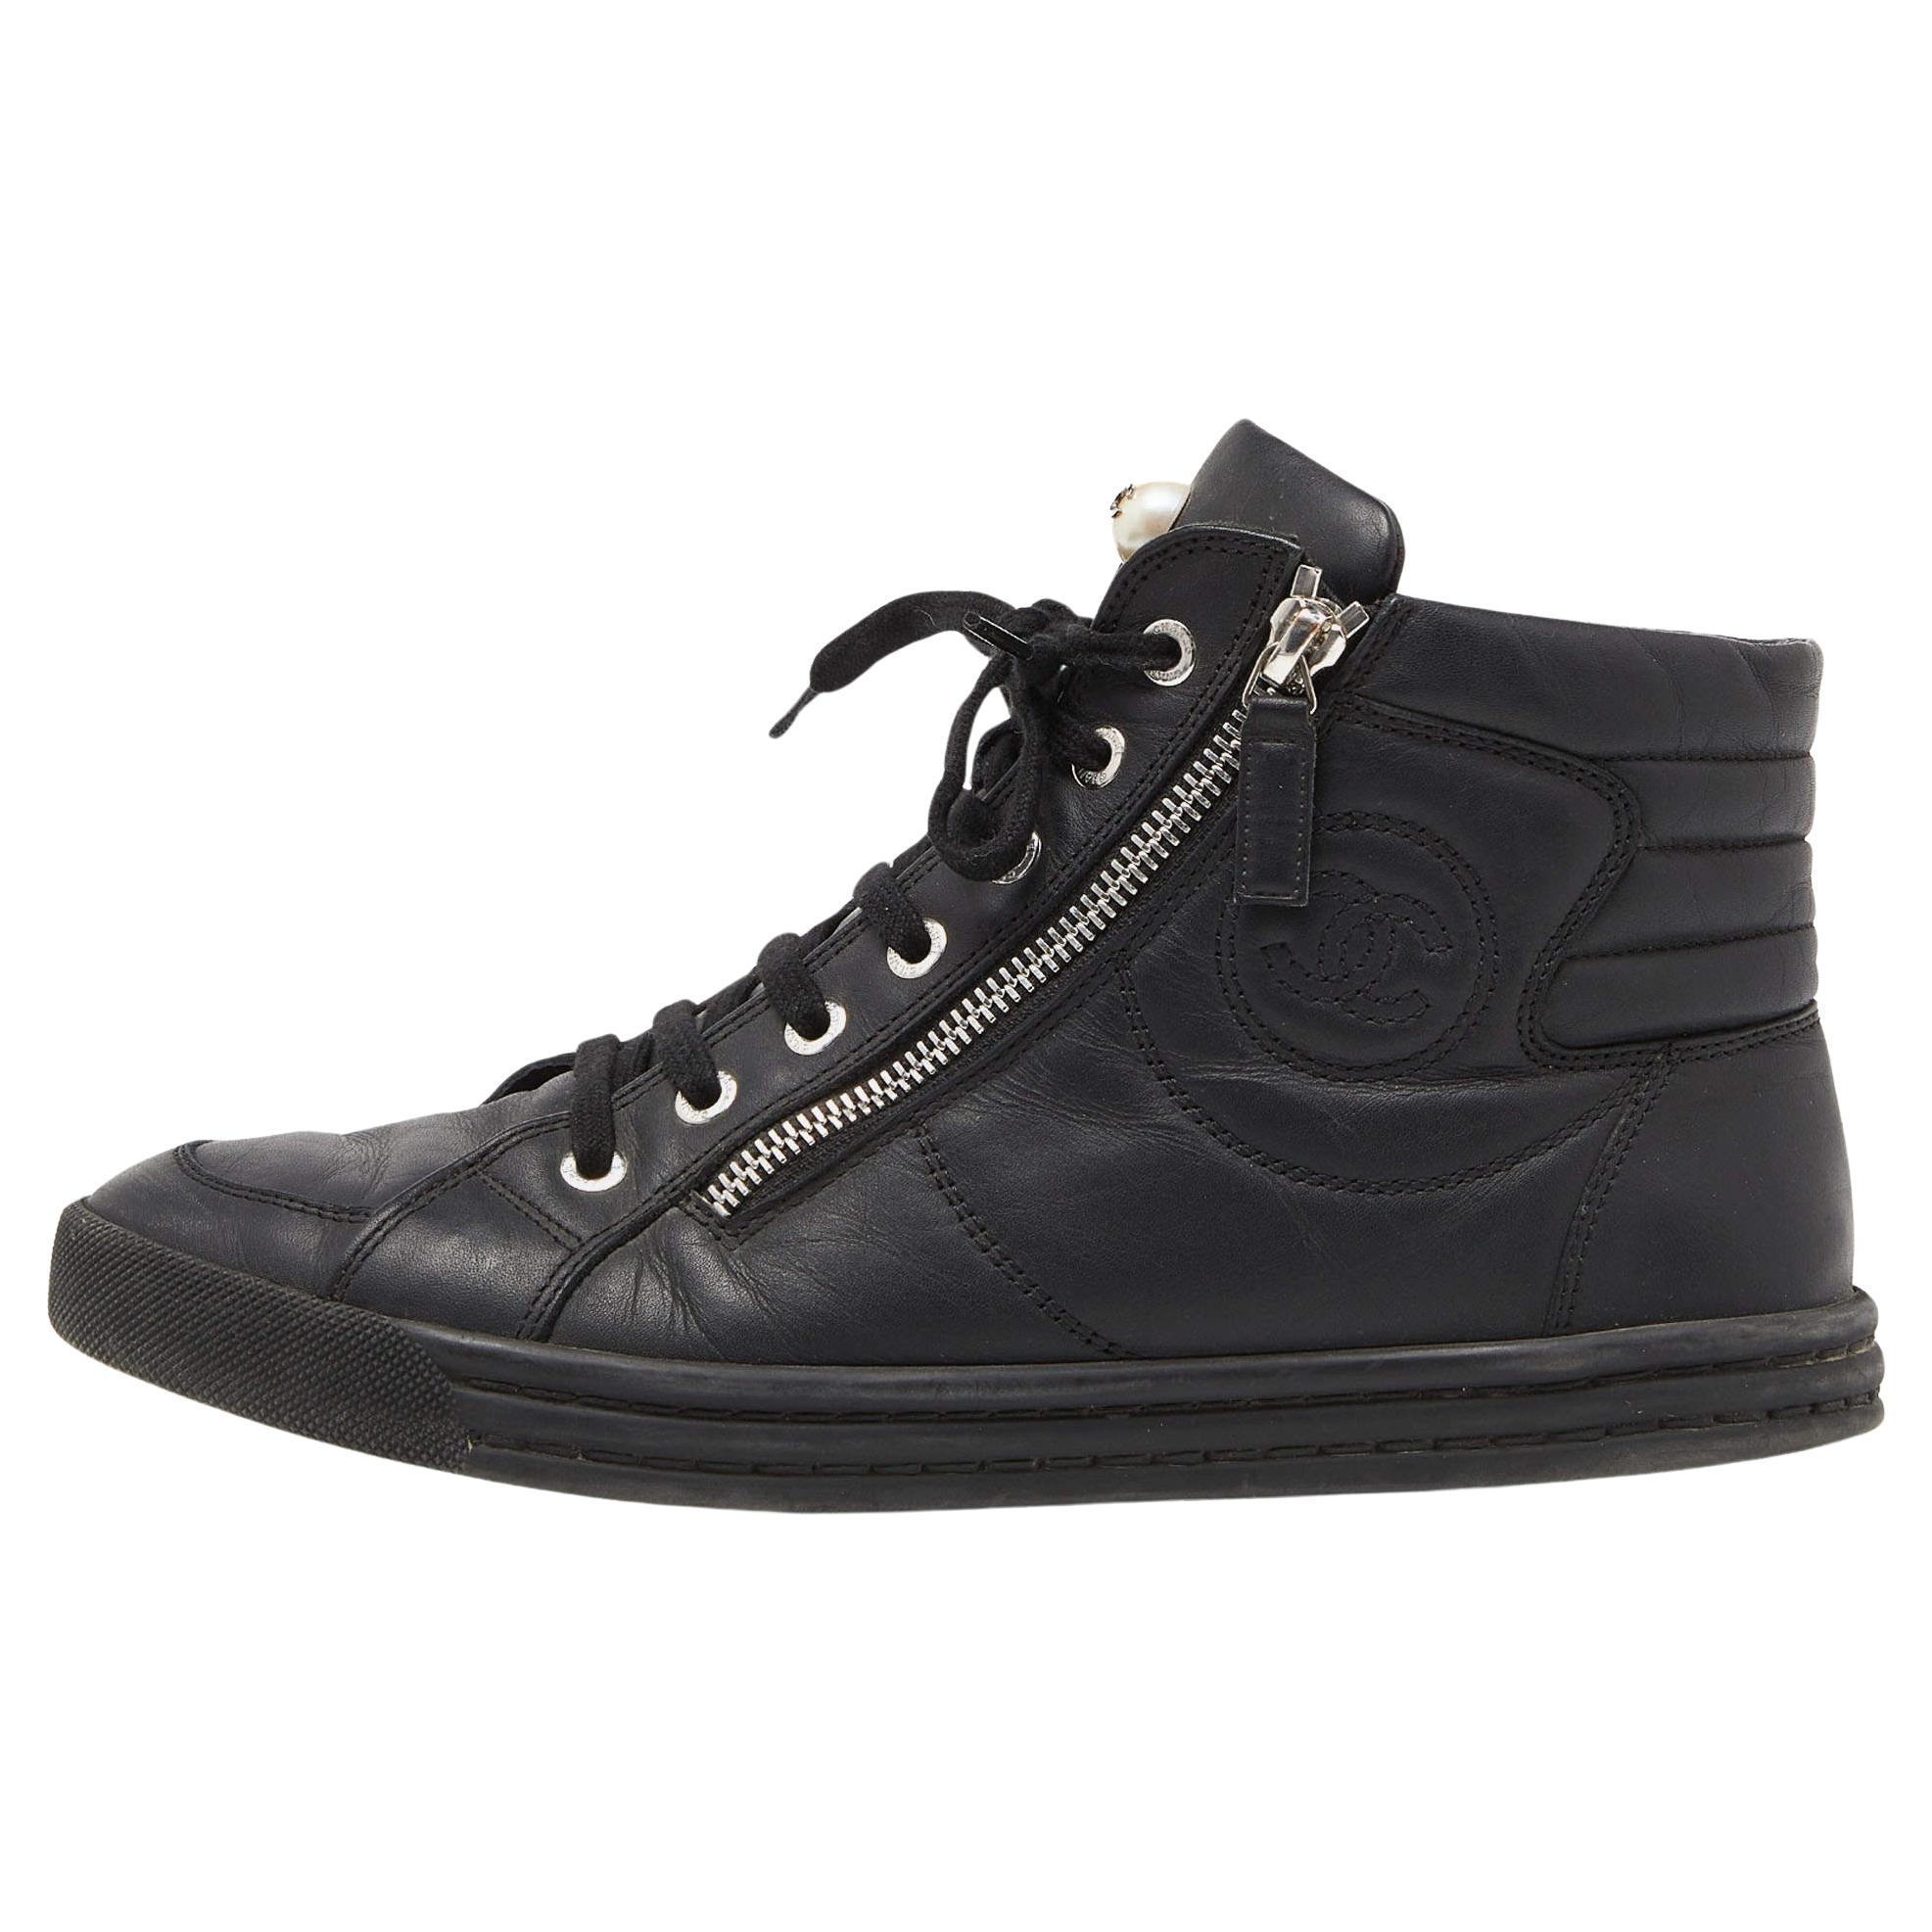 Chanel Black Leather CC Zip Link High Top Sneakers Size 39.5 For Sale